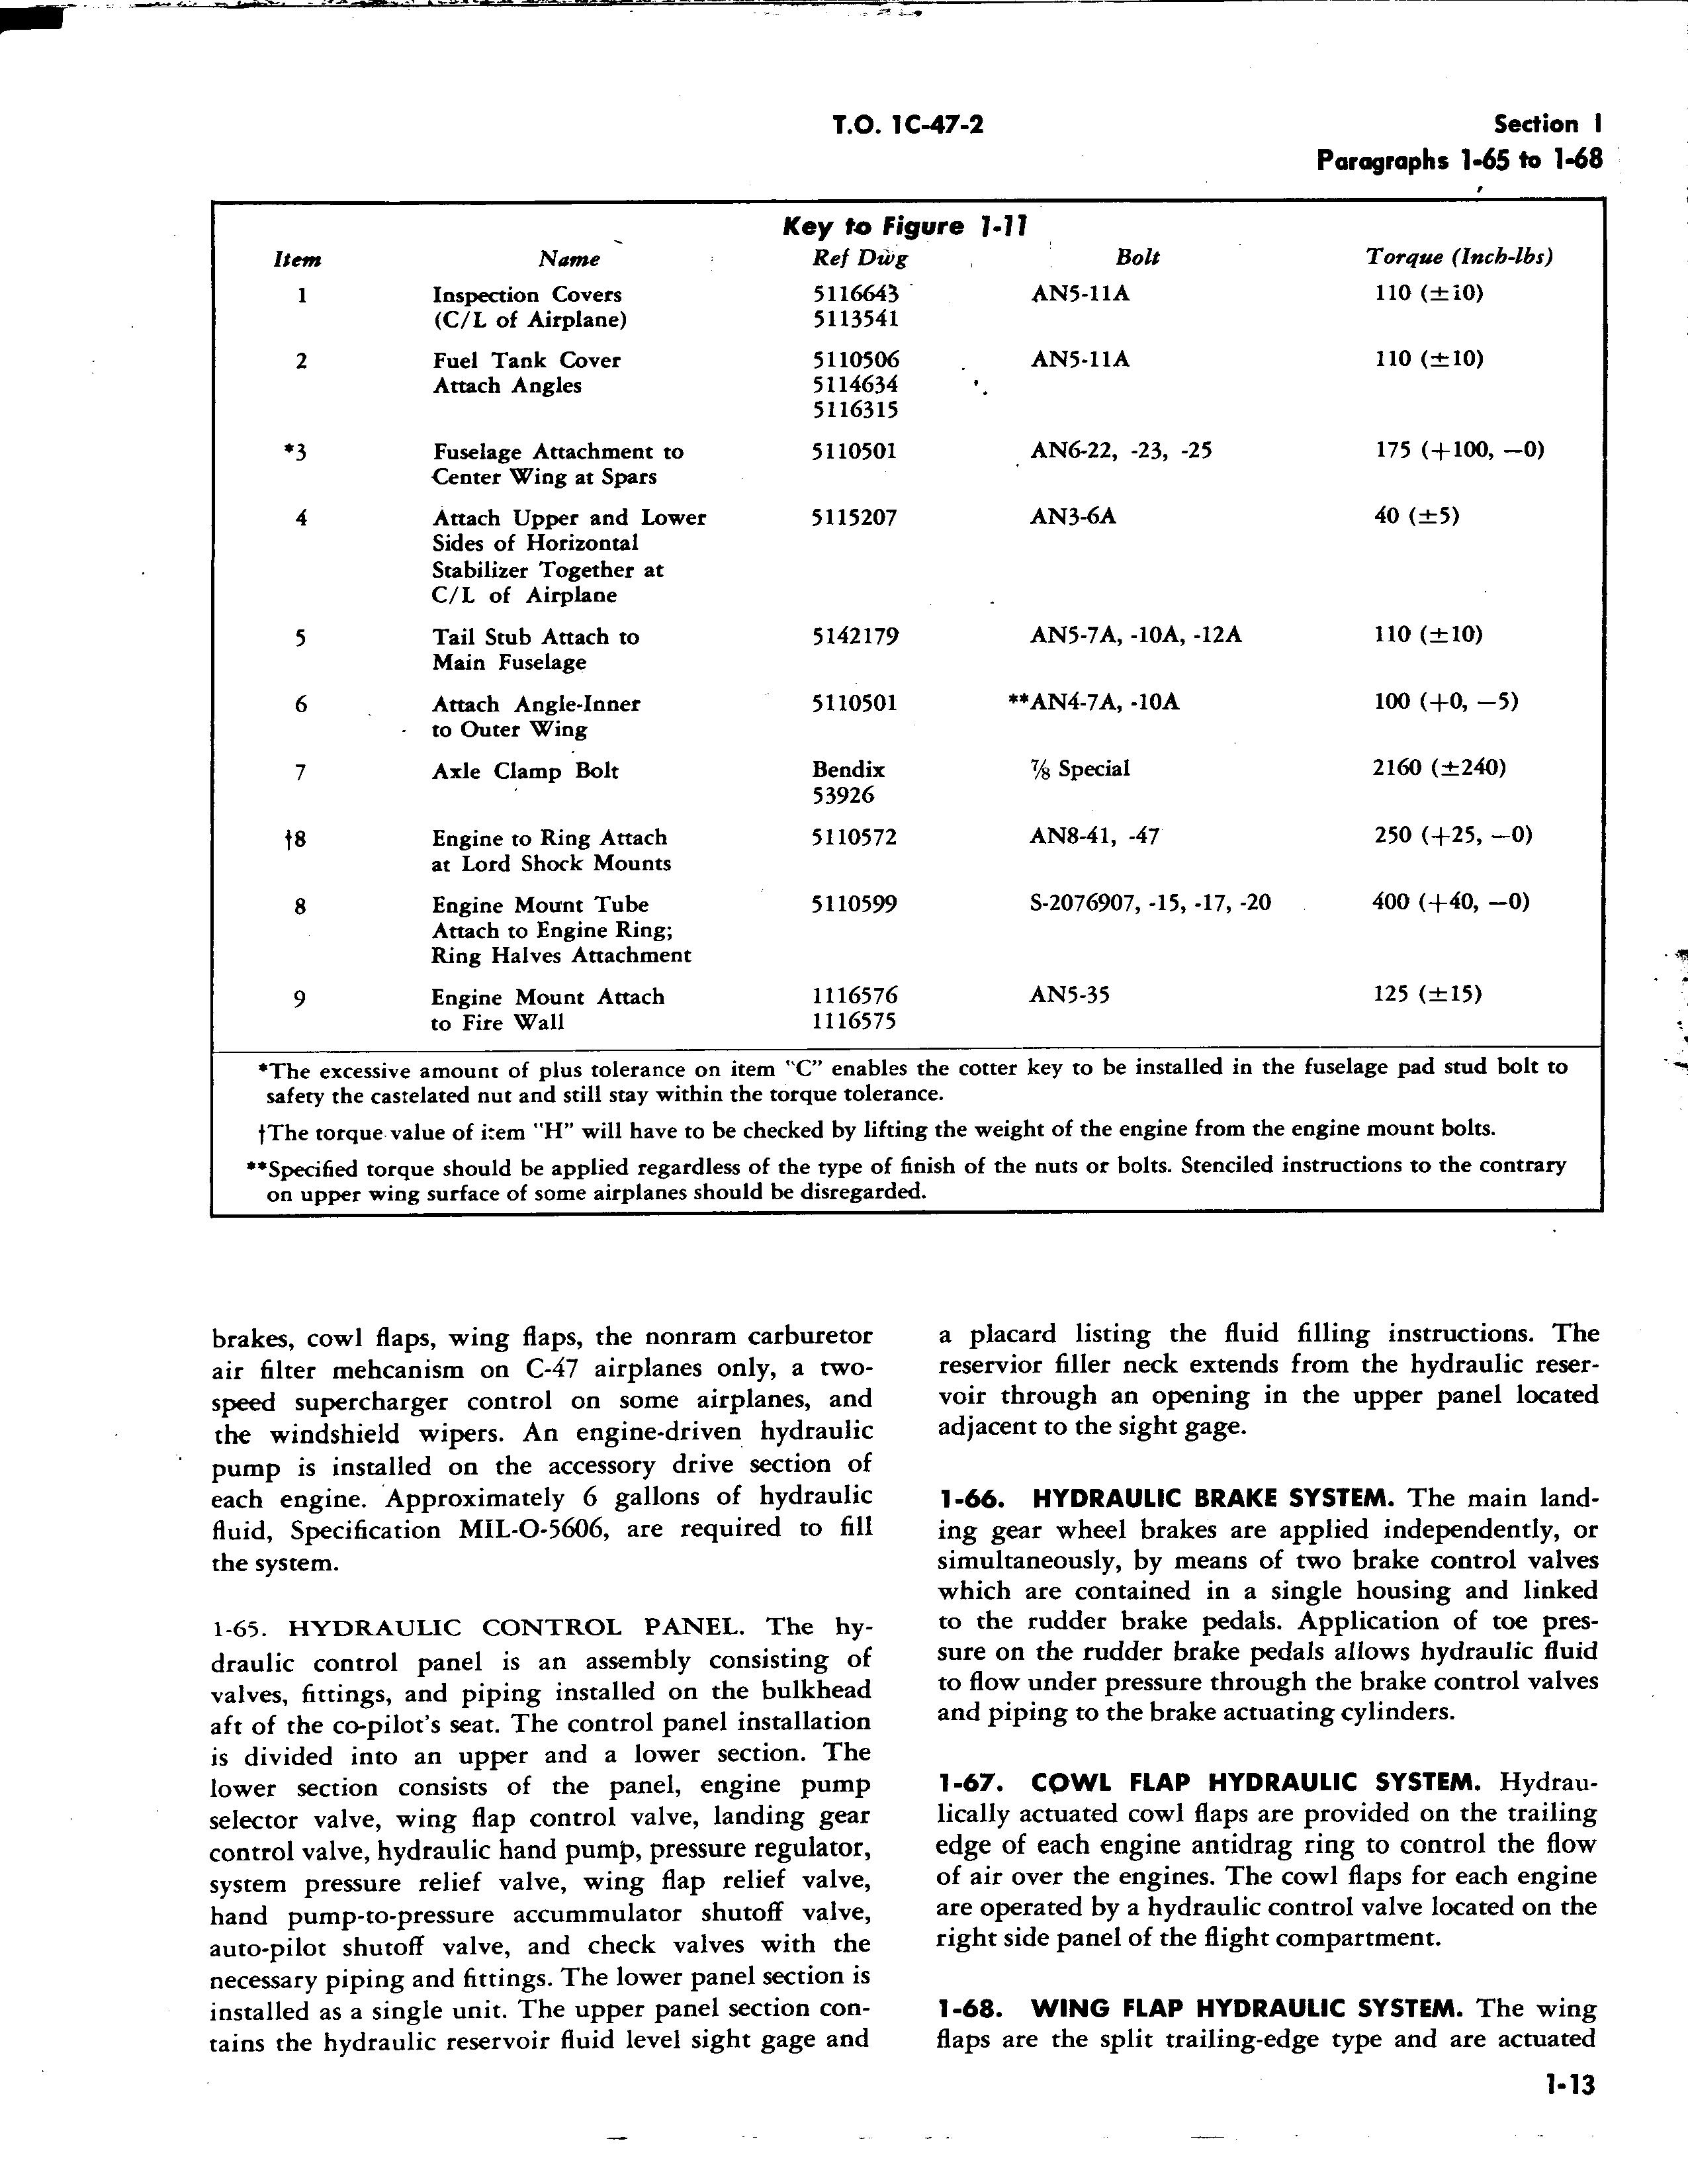 Sample page 57 from AirCorps Library document: Maintenance Instructions for C-47, A, B, D, C-117A and C-117B Aircraft